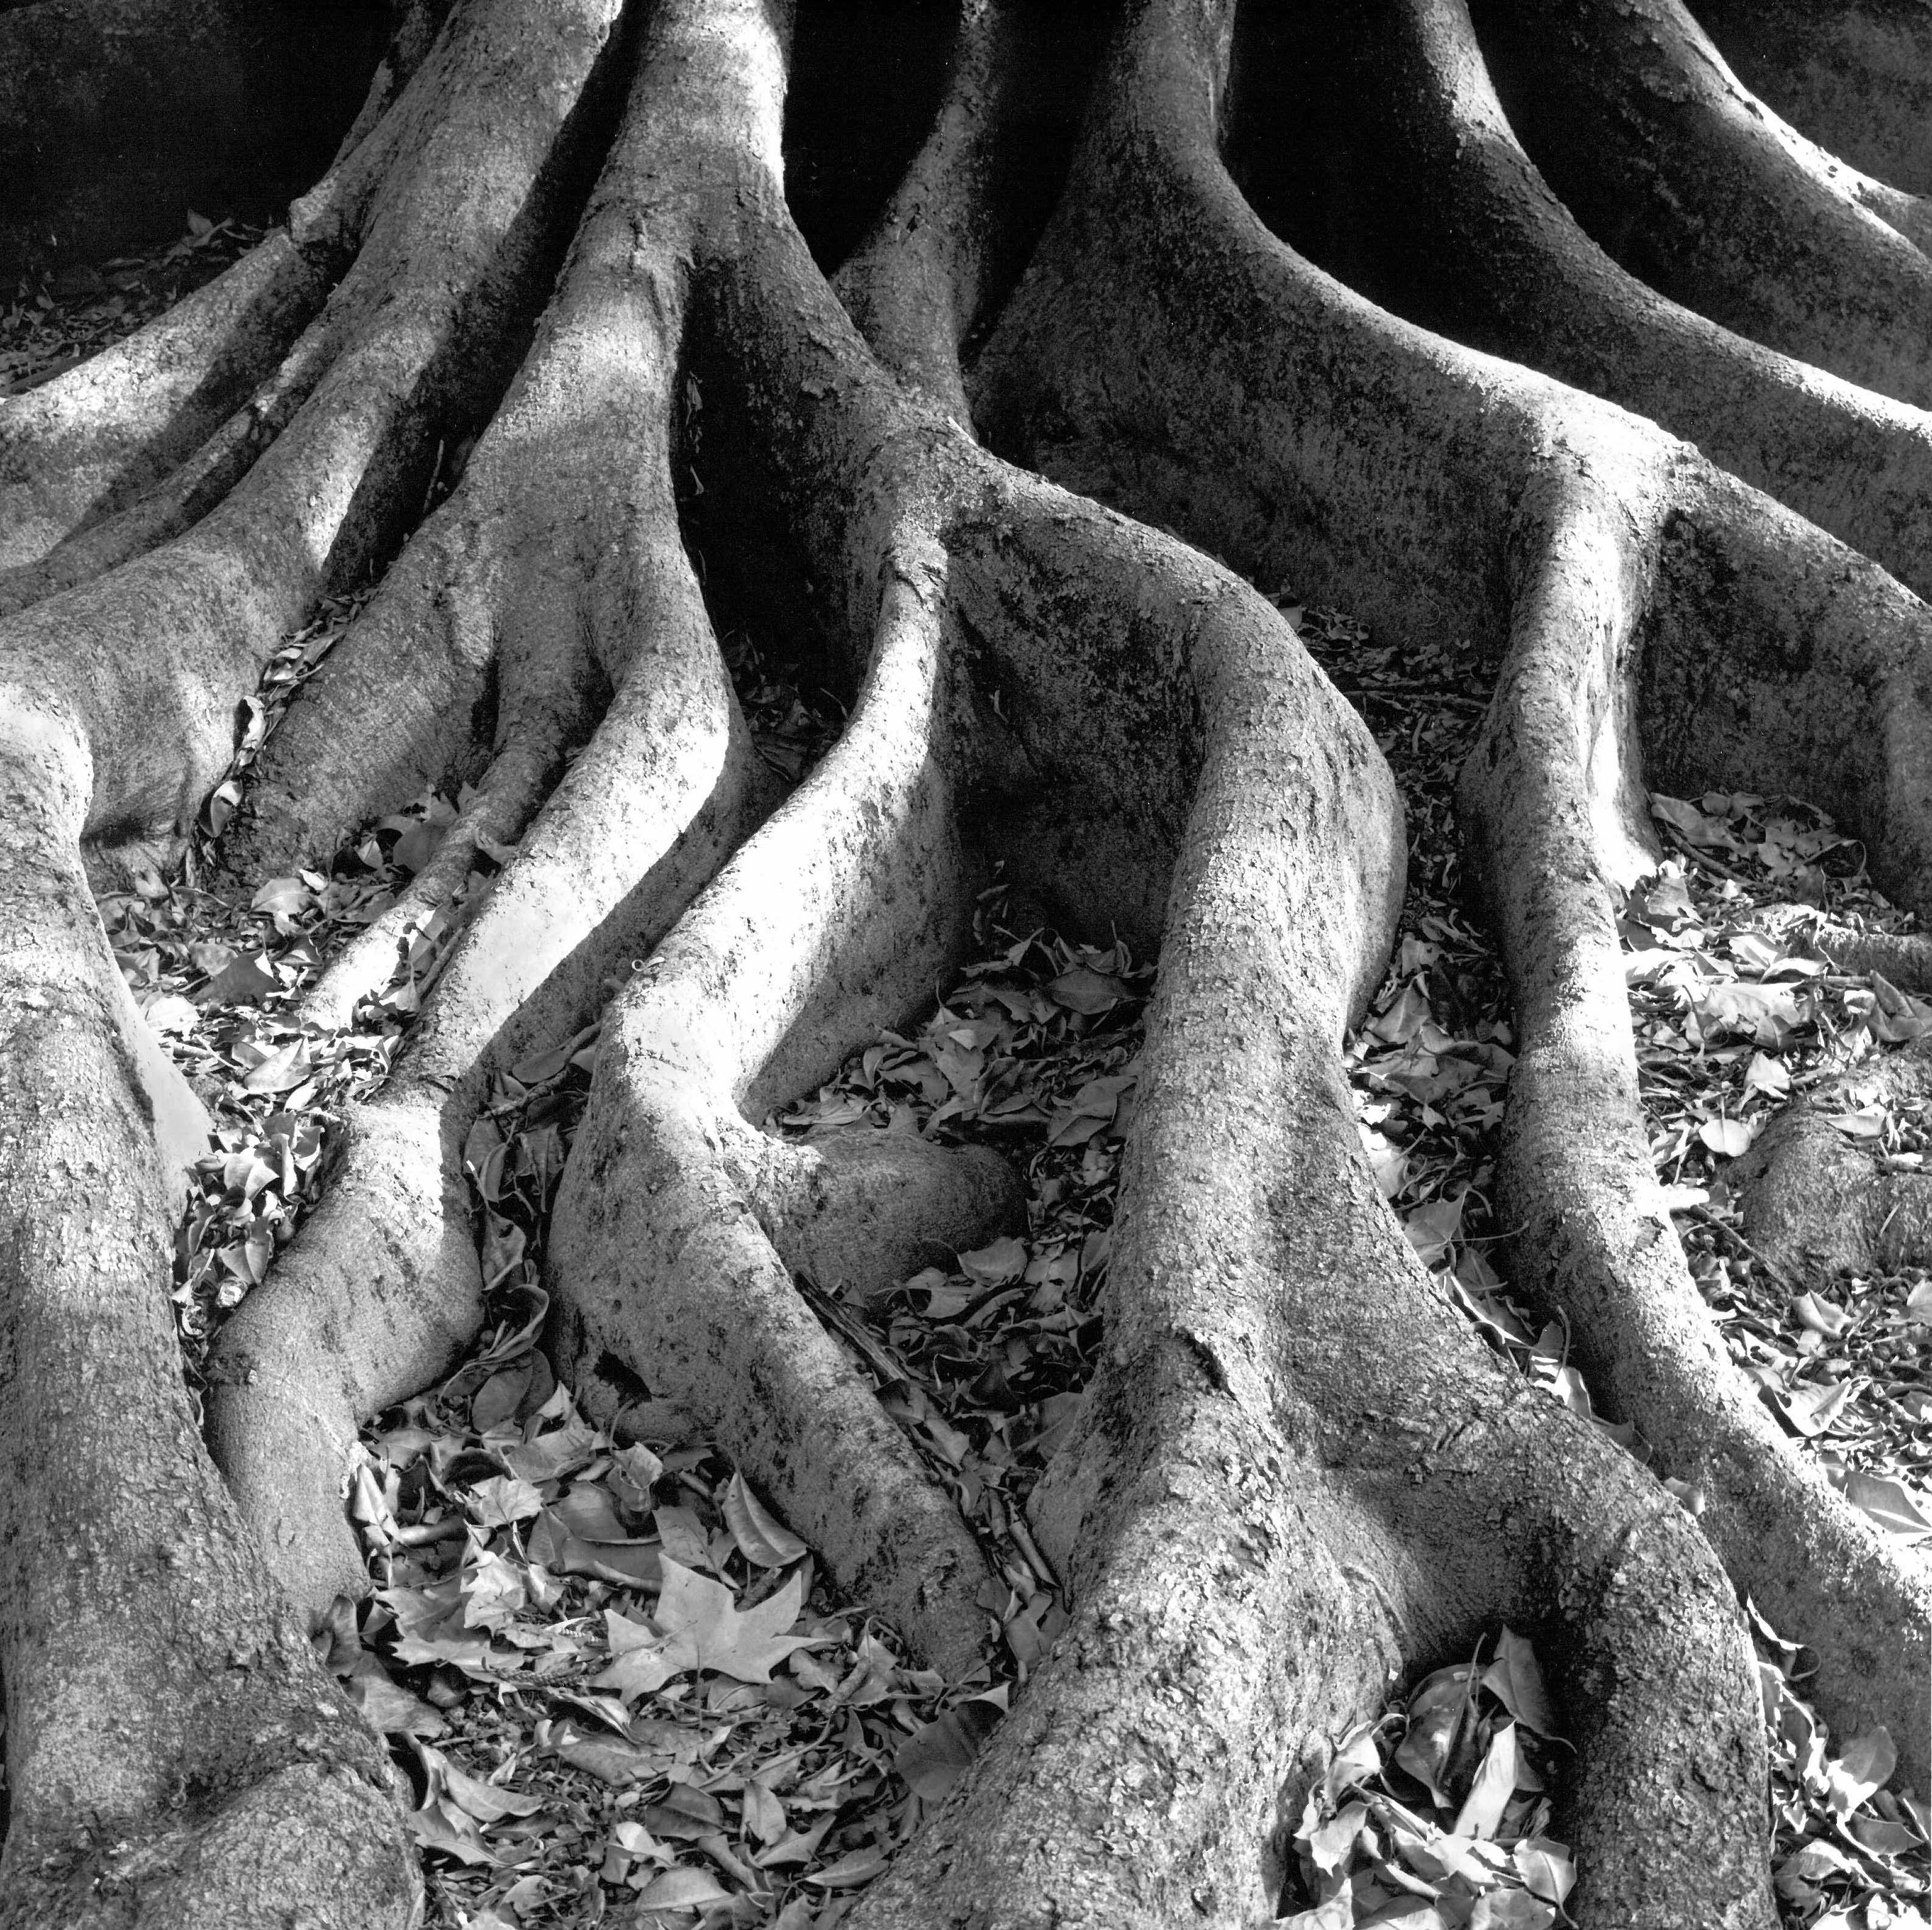 Moreton Bay fig tree roots in Hyde Park Perth, c 2000